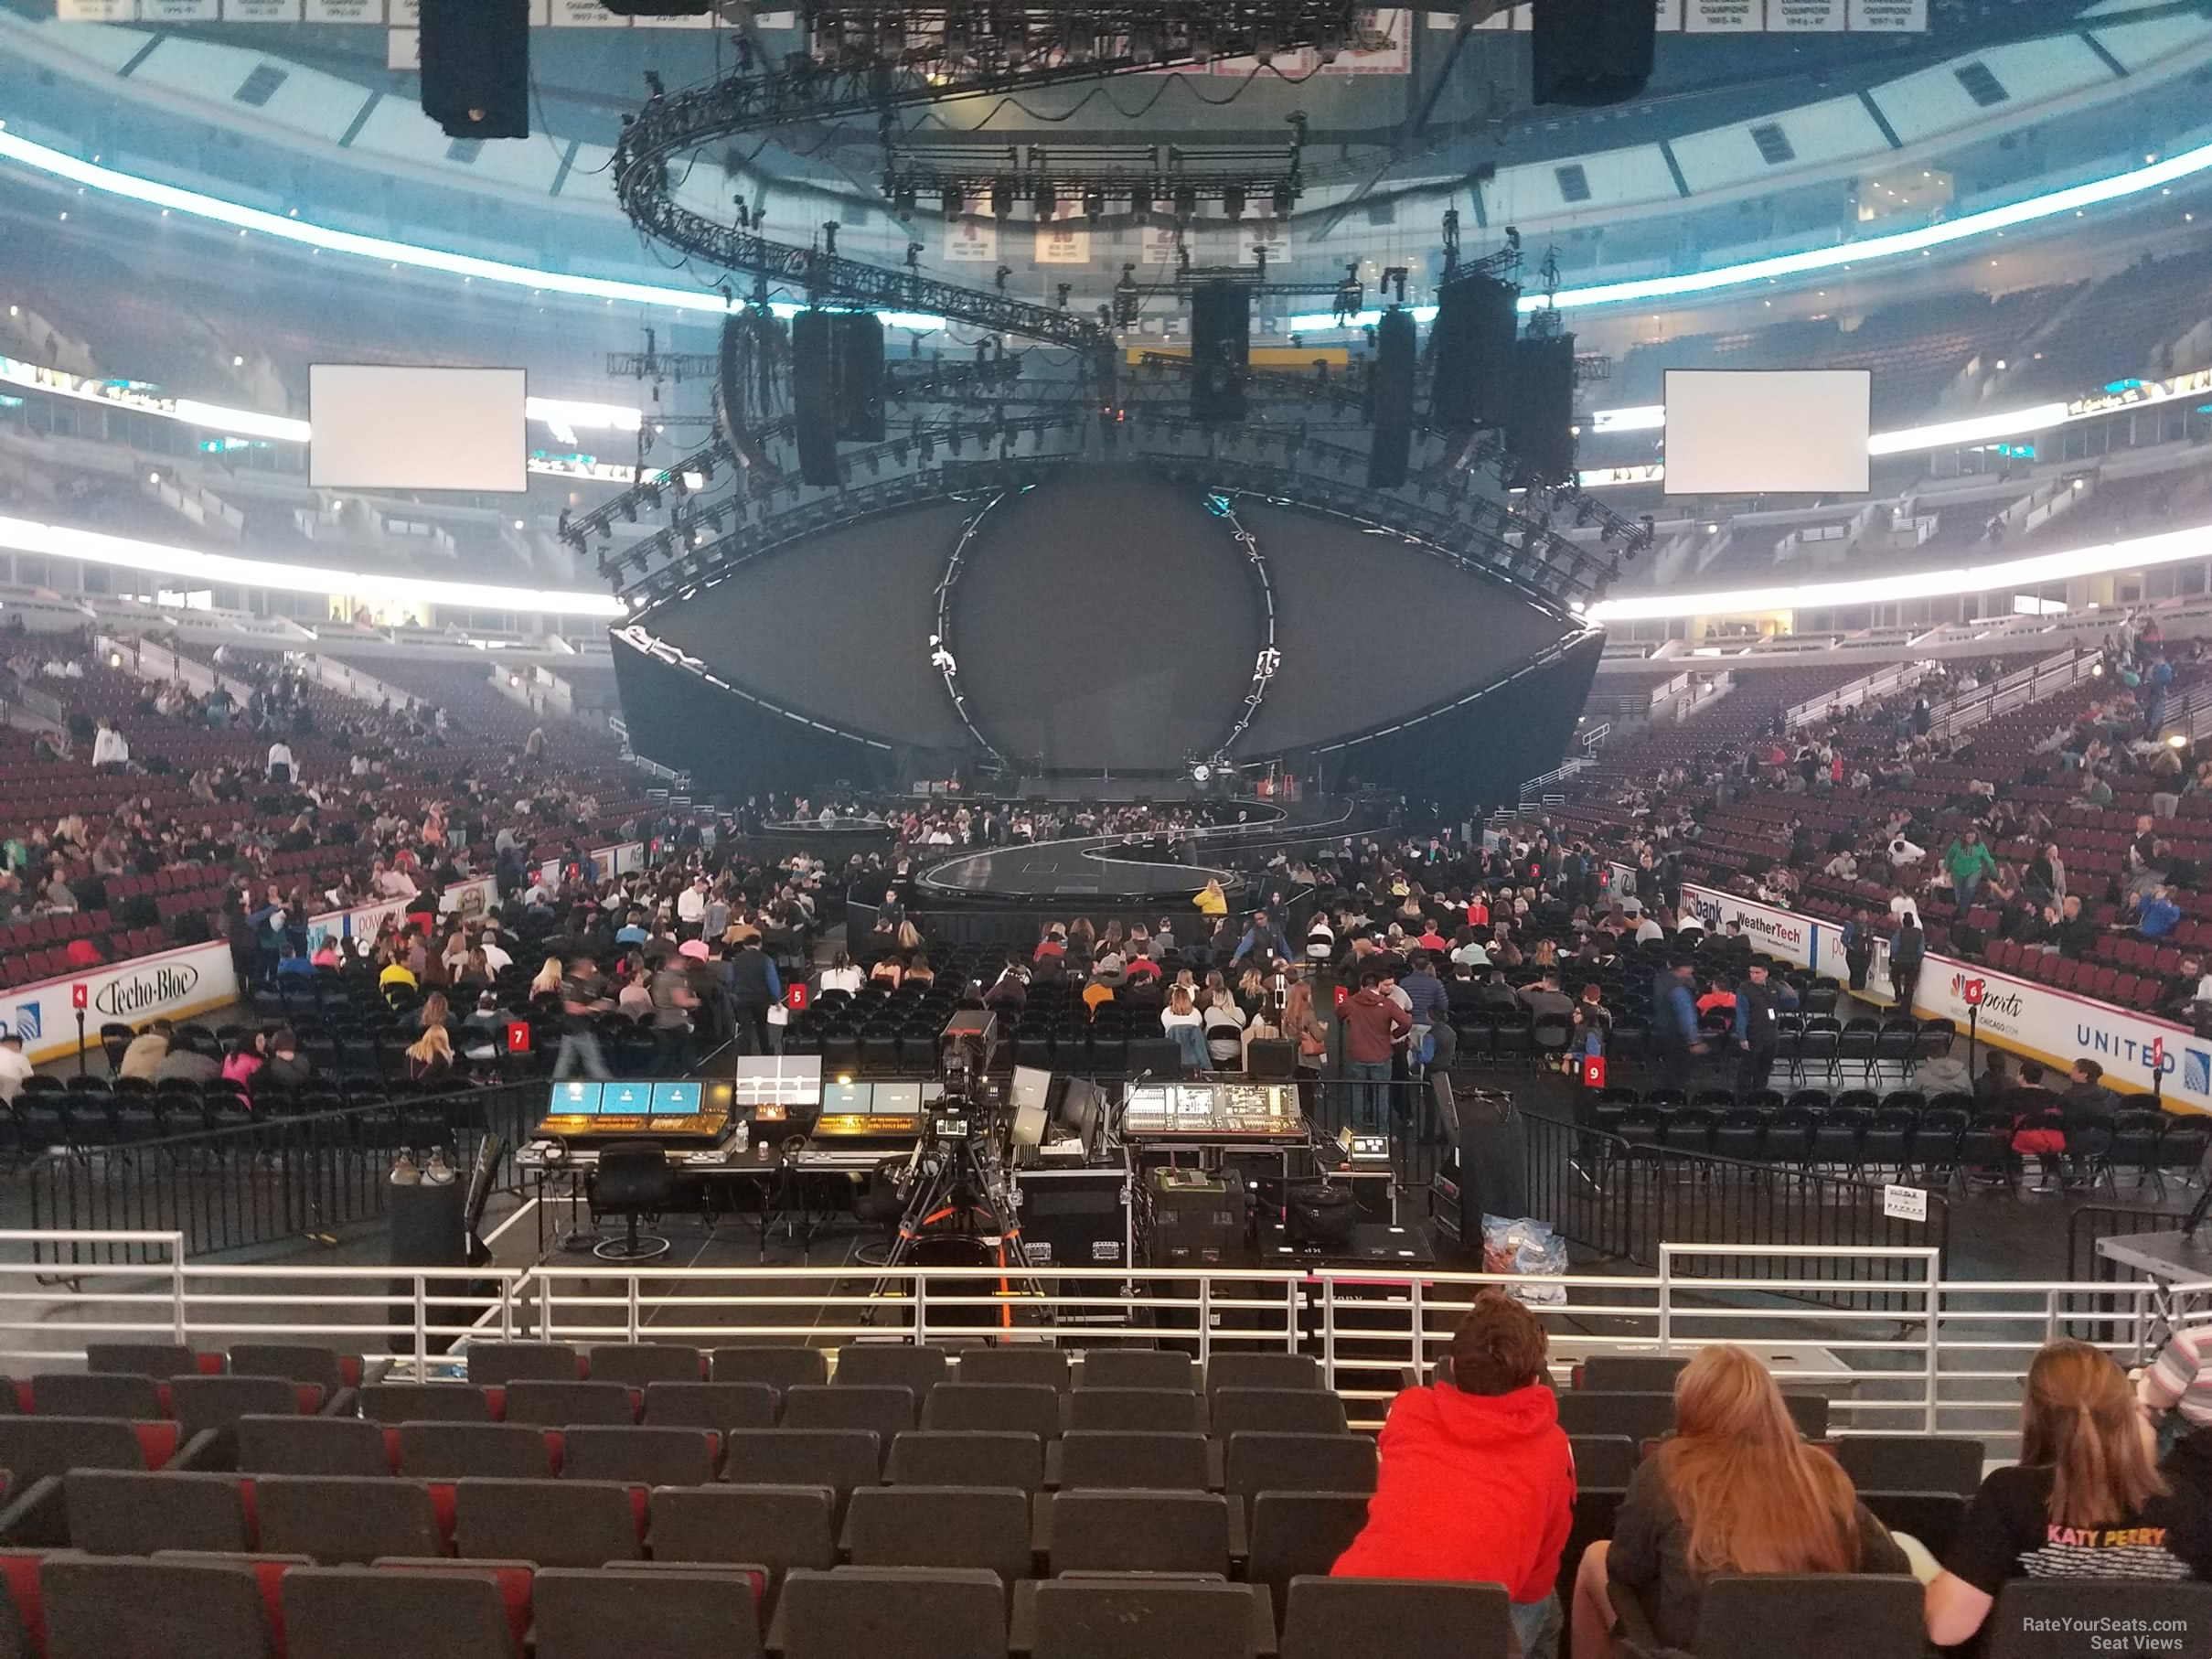 section 106, row 12 seat view  for concert - united center